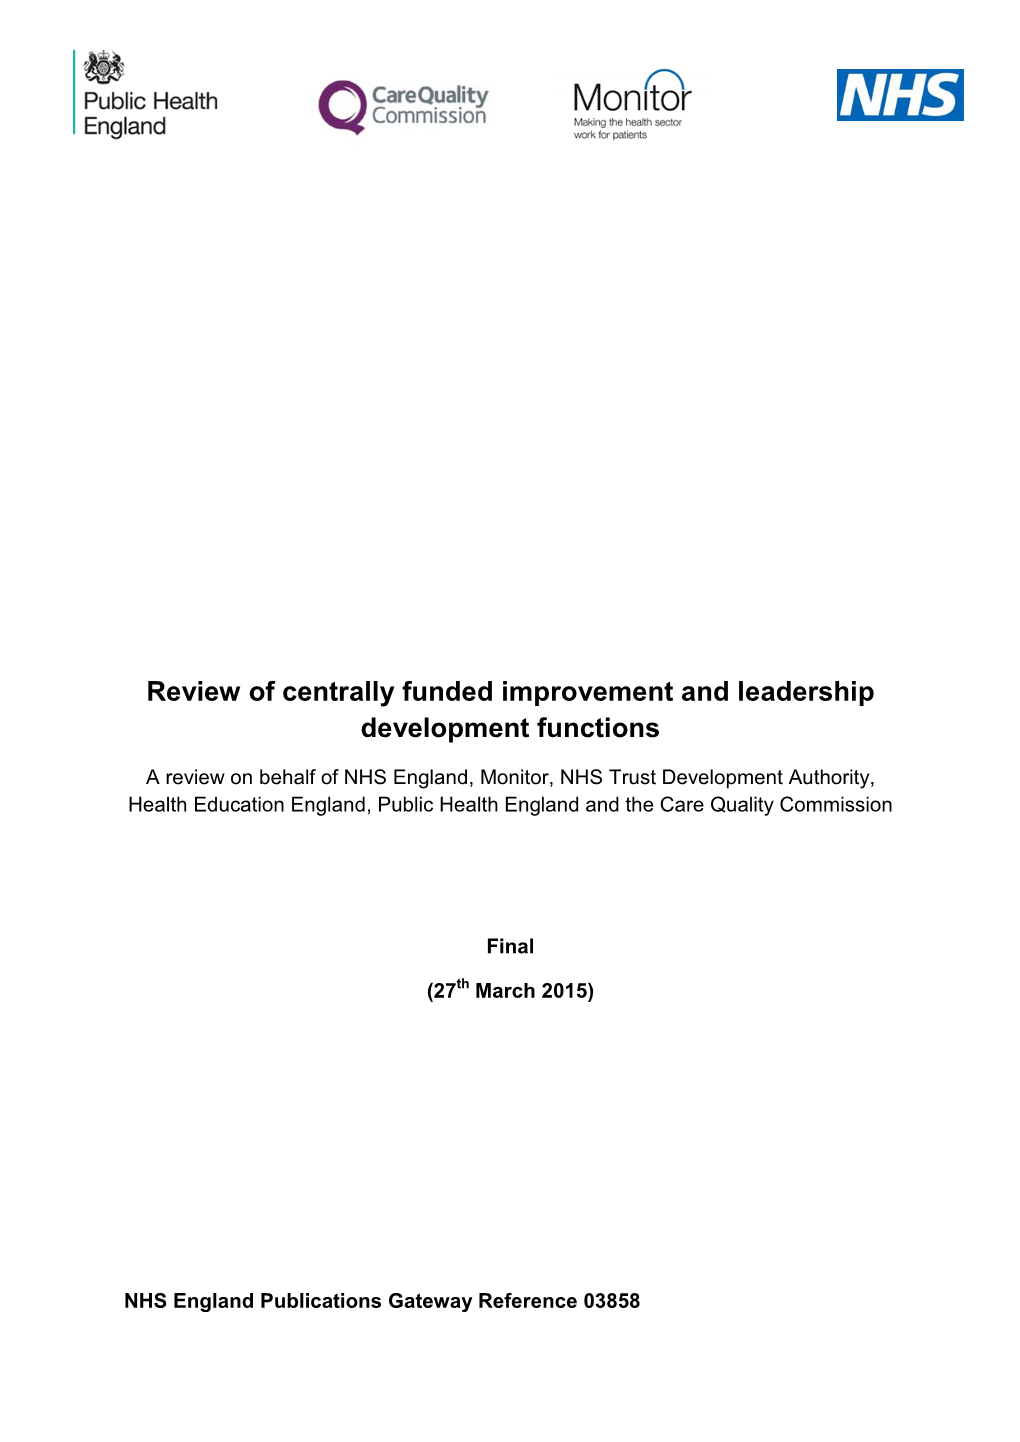 Review of Centrally Funded Improvement and Leadership Development Functions